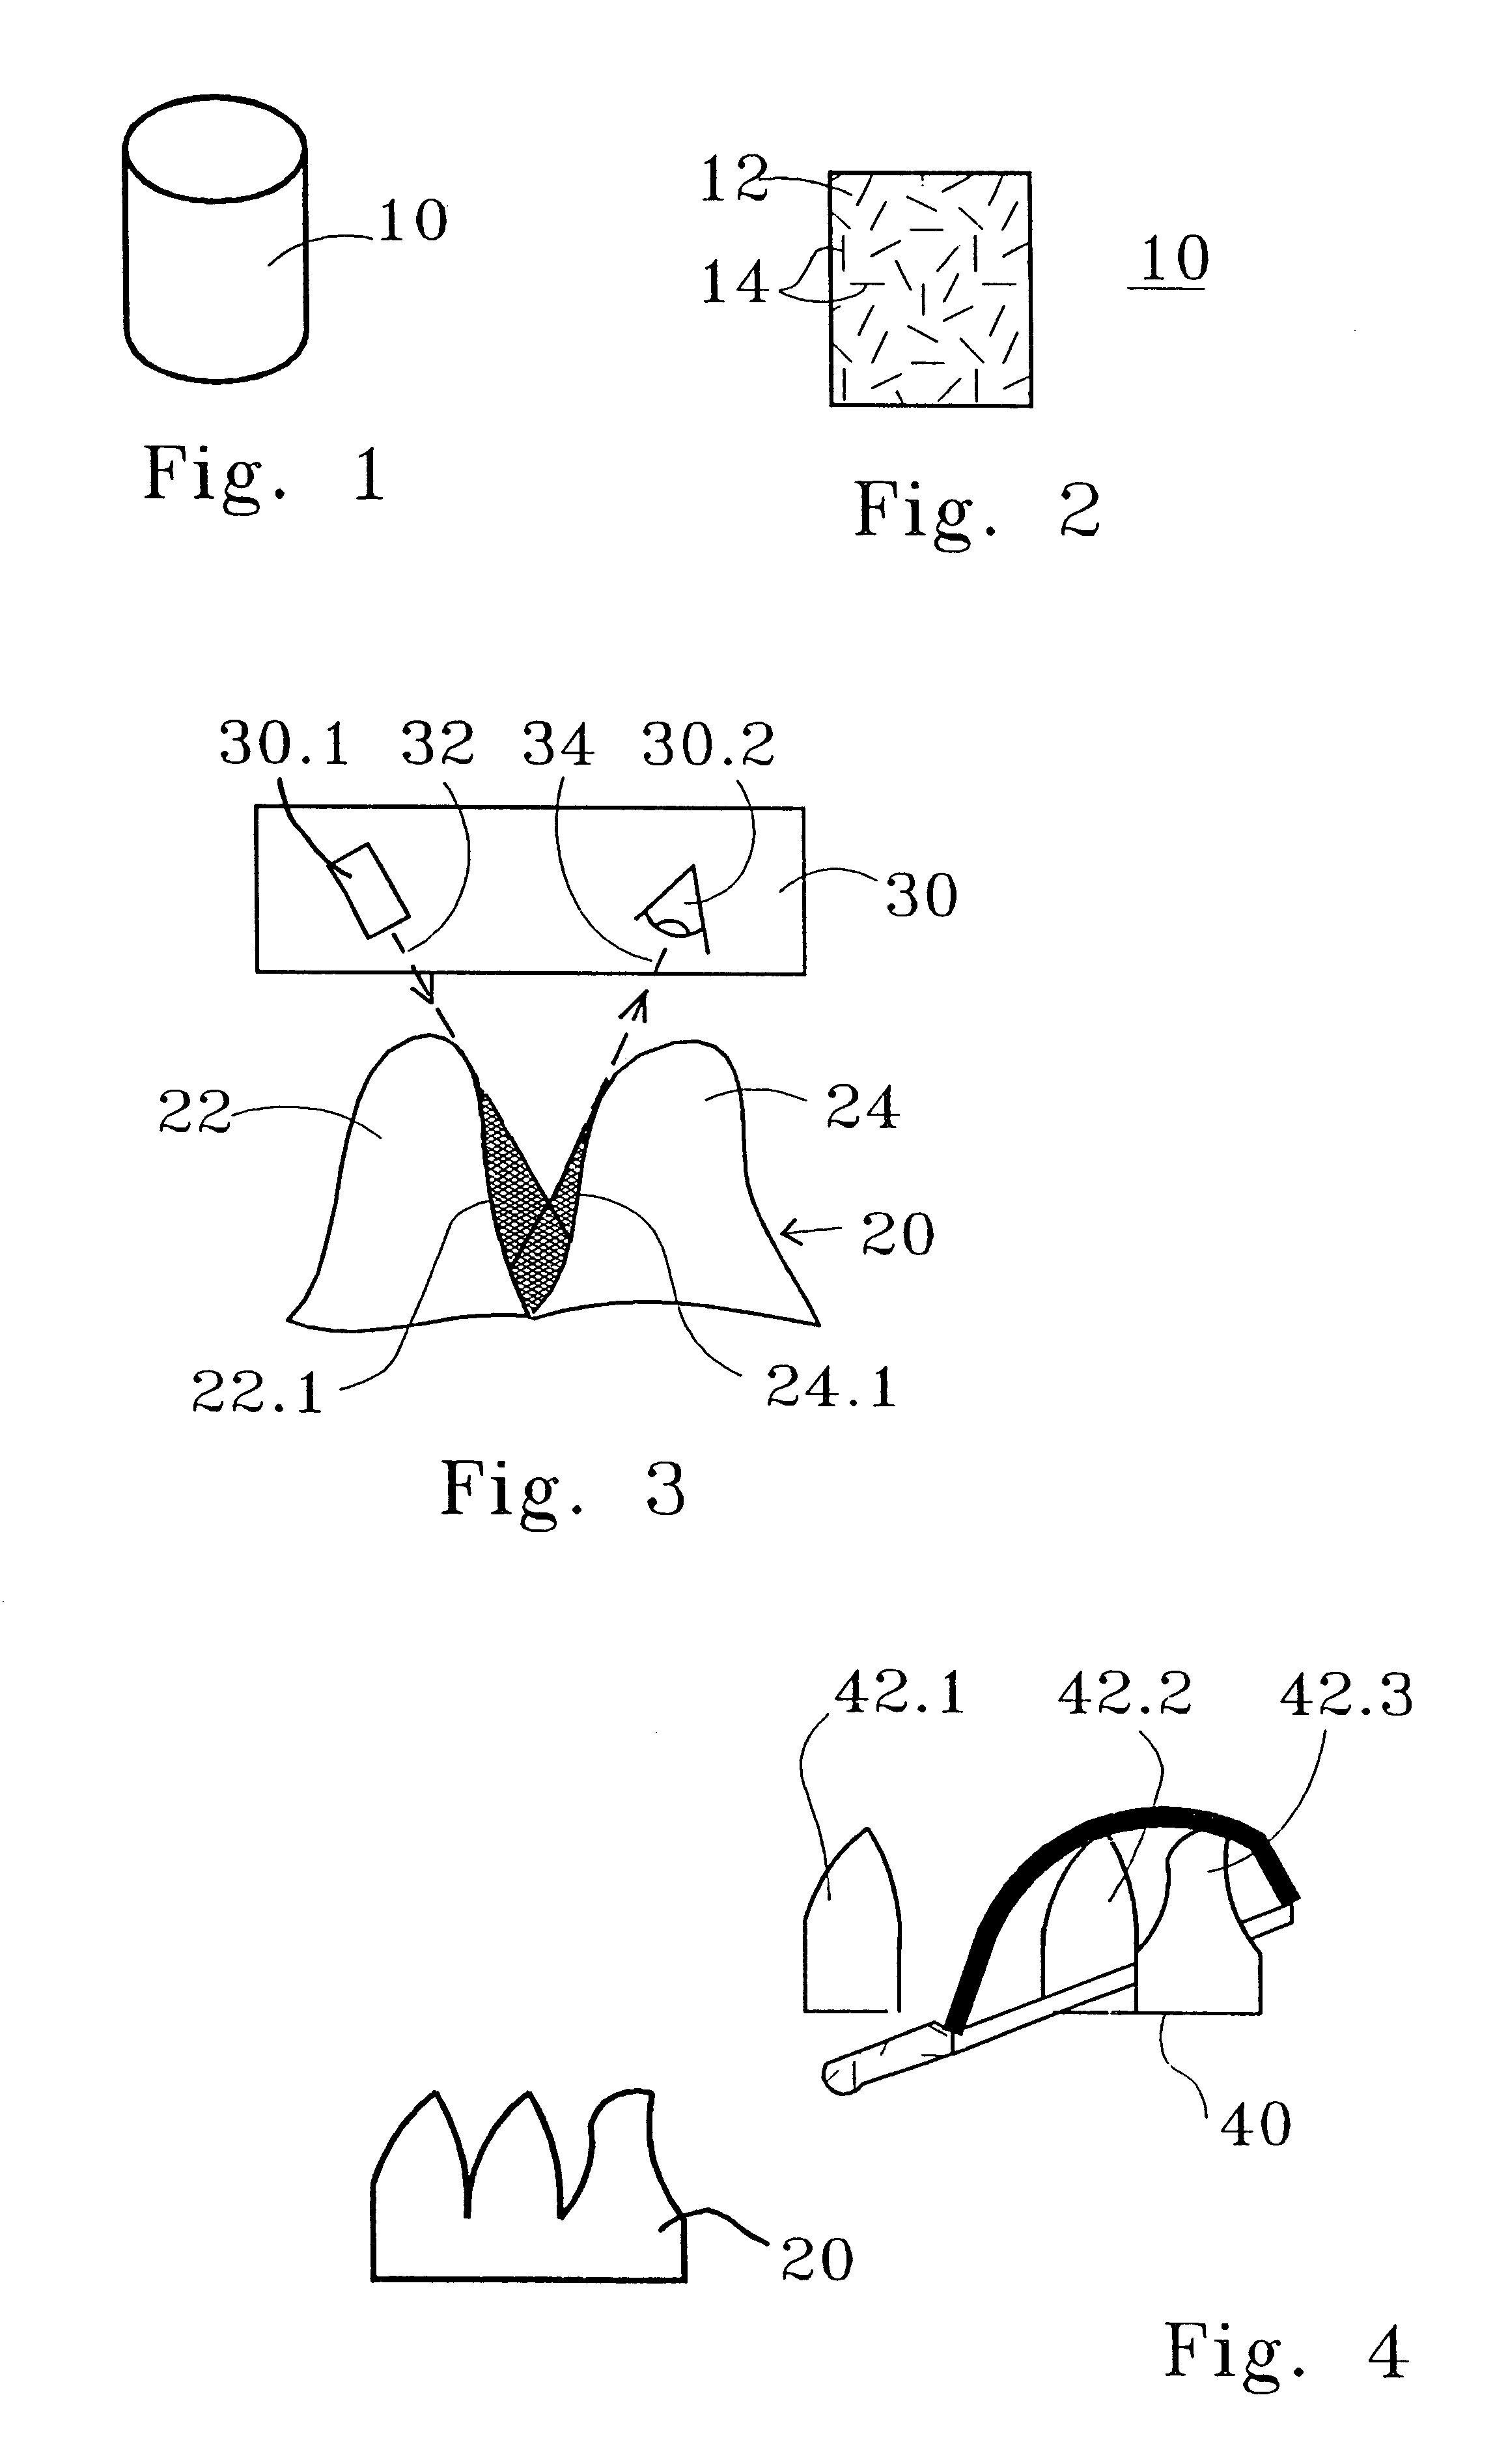 Material for a dental prosthesis, method and device for determining the shape of a remaining tooth area to be provided with a dental prosthesis, method and arrangement for producing a dental prosthesis and use of the arrangement